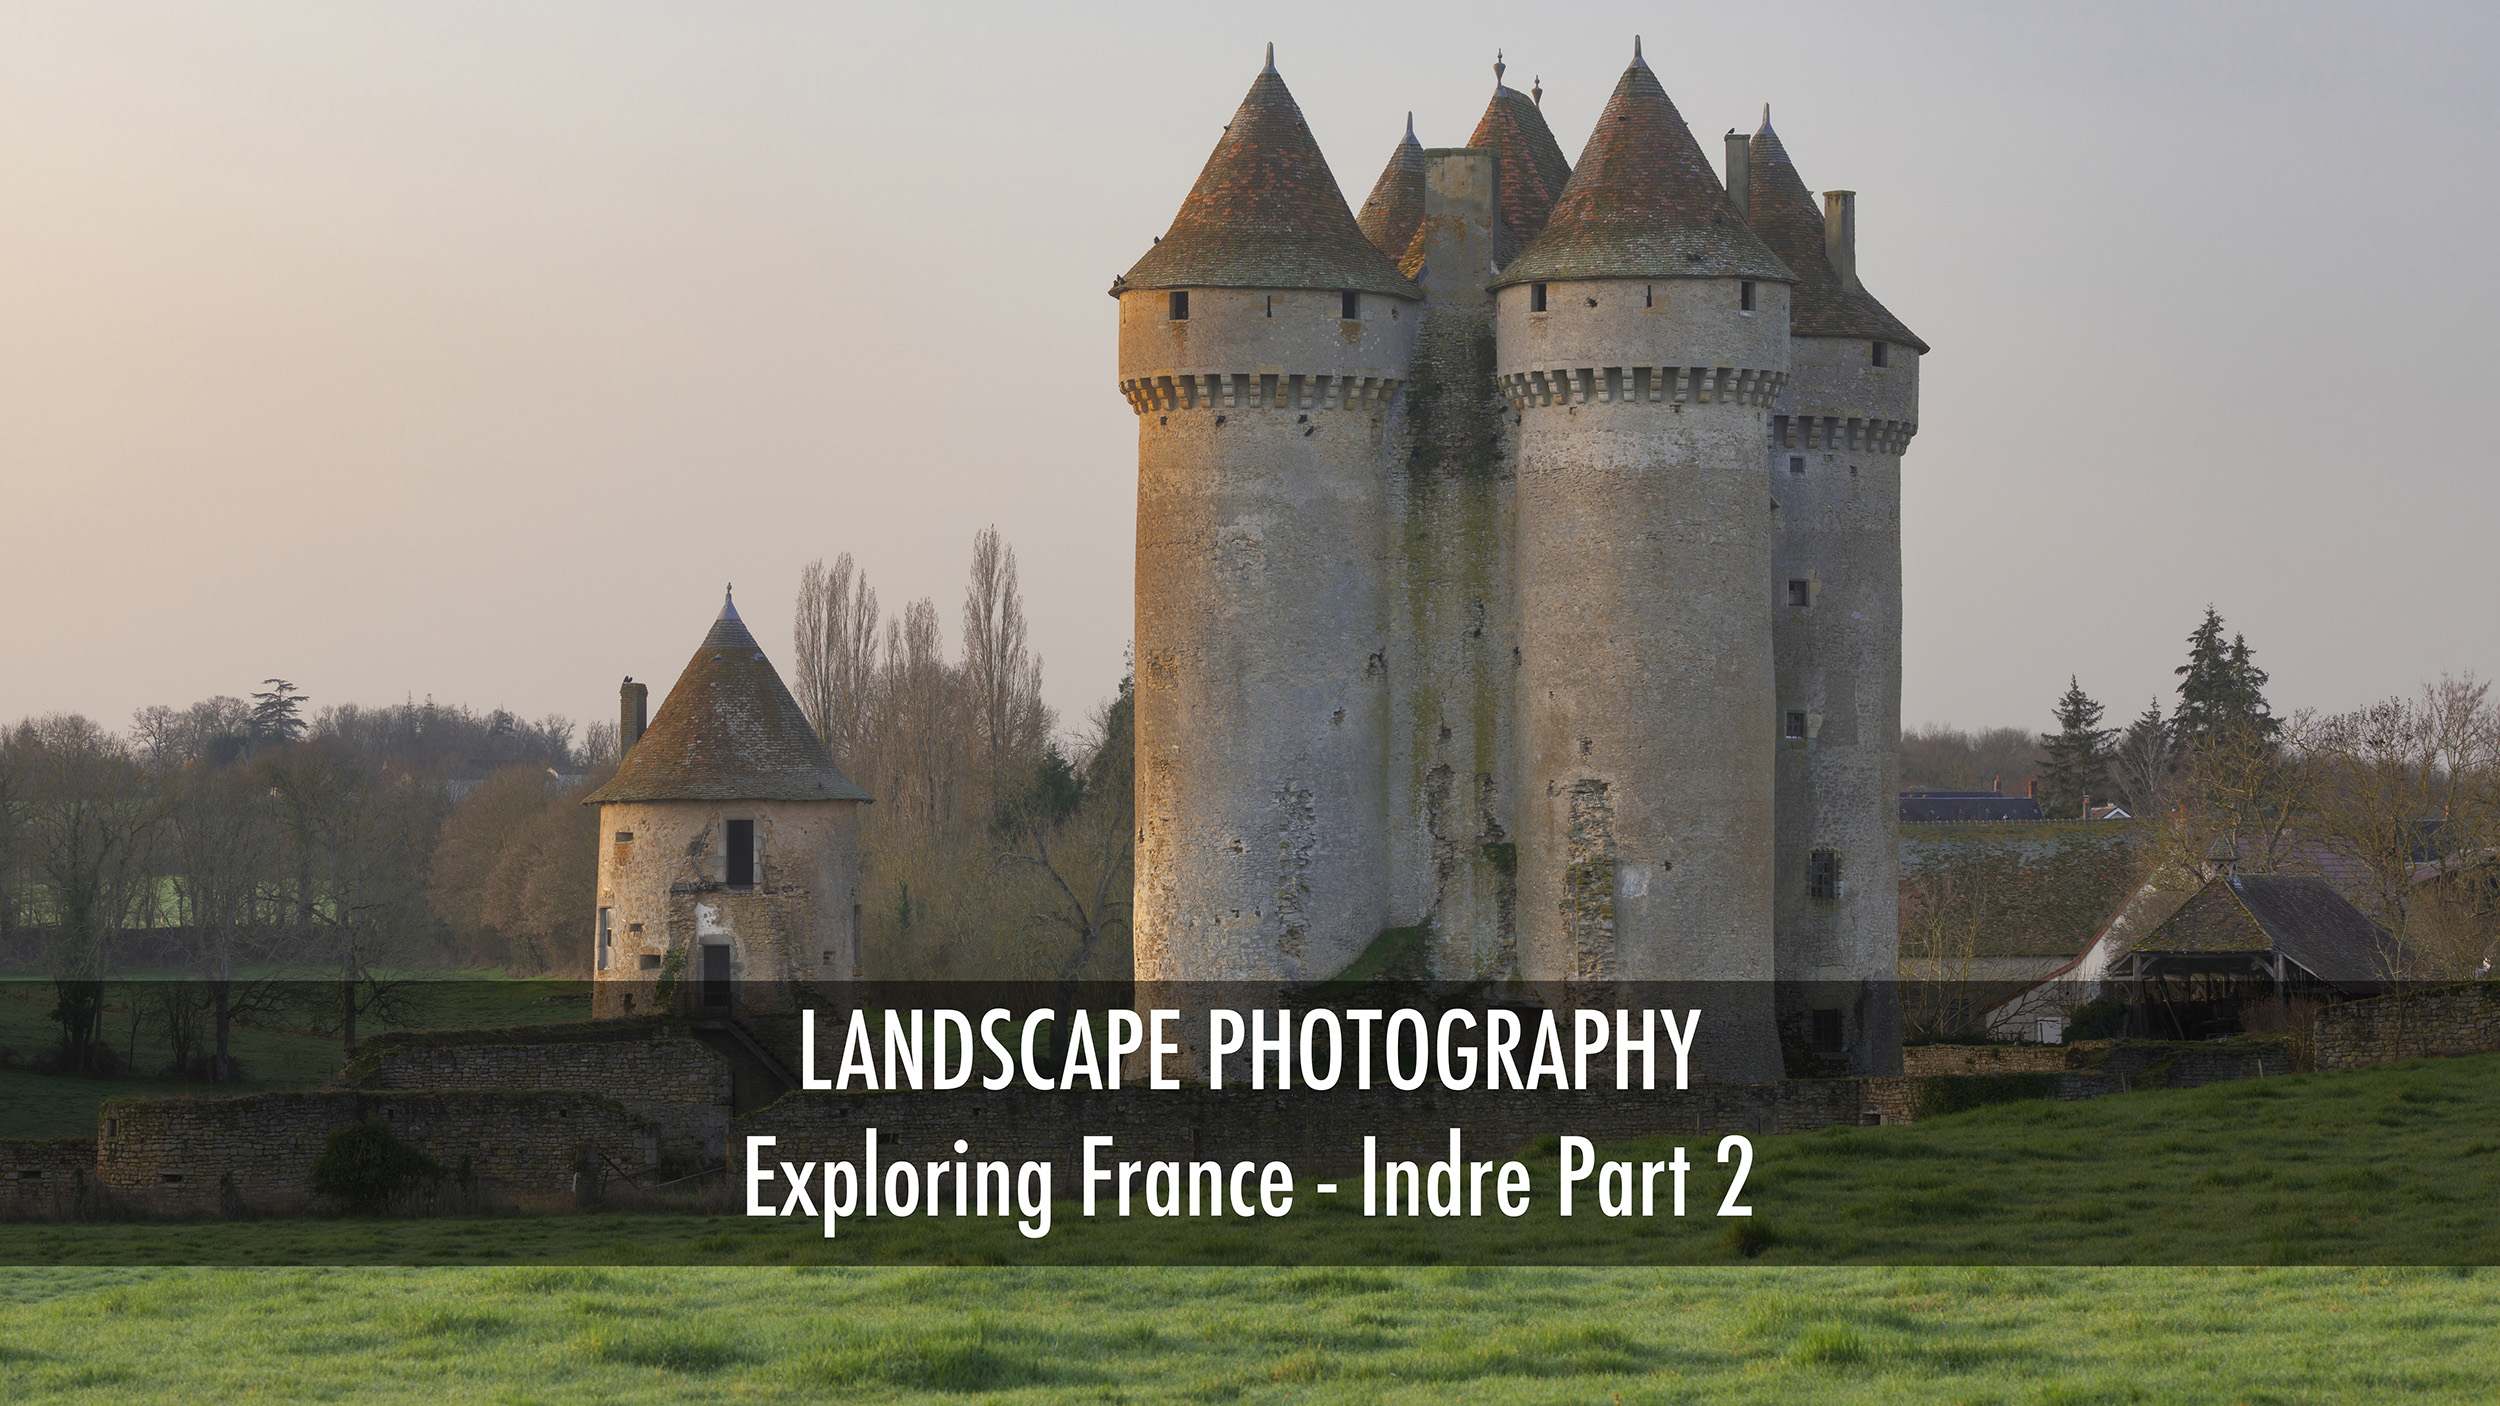 Exploring France in the department of Indre. Landscape photography.